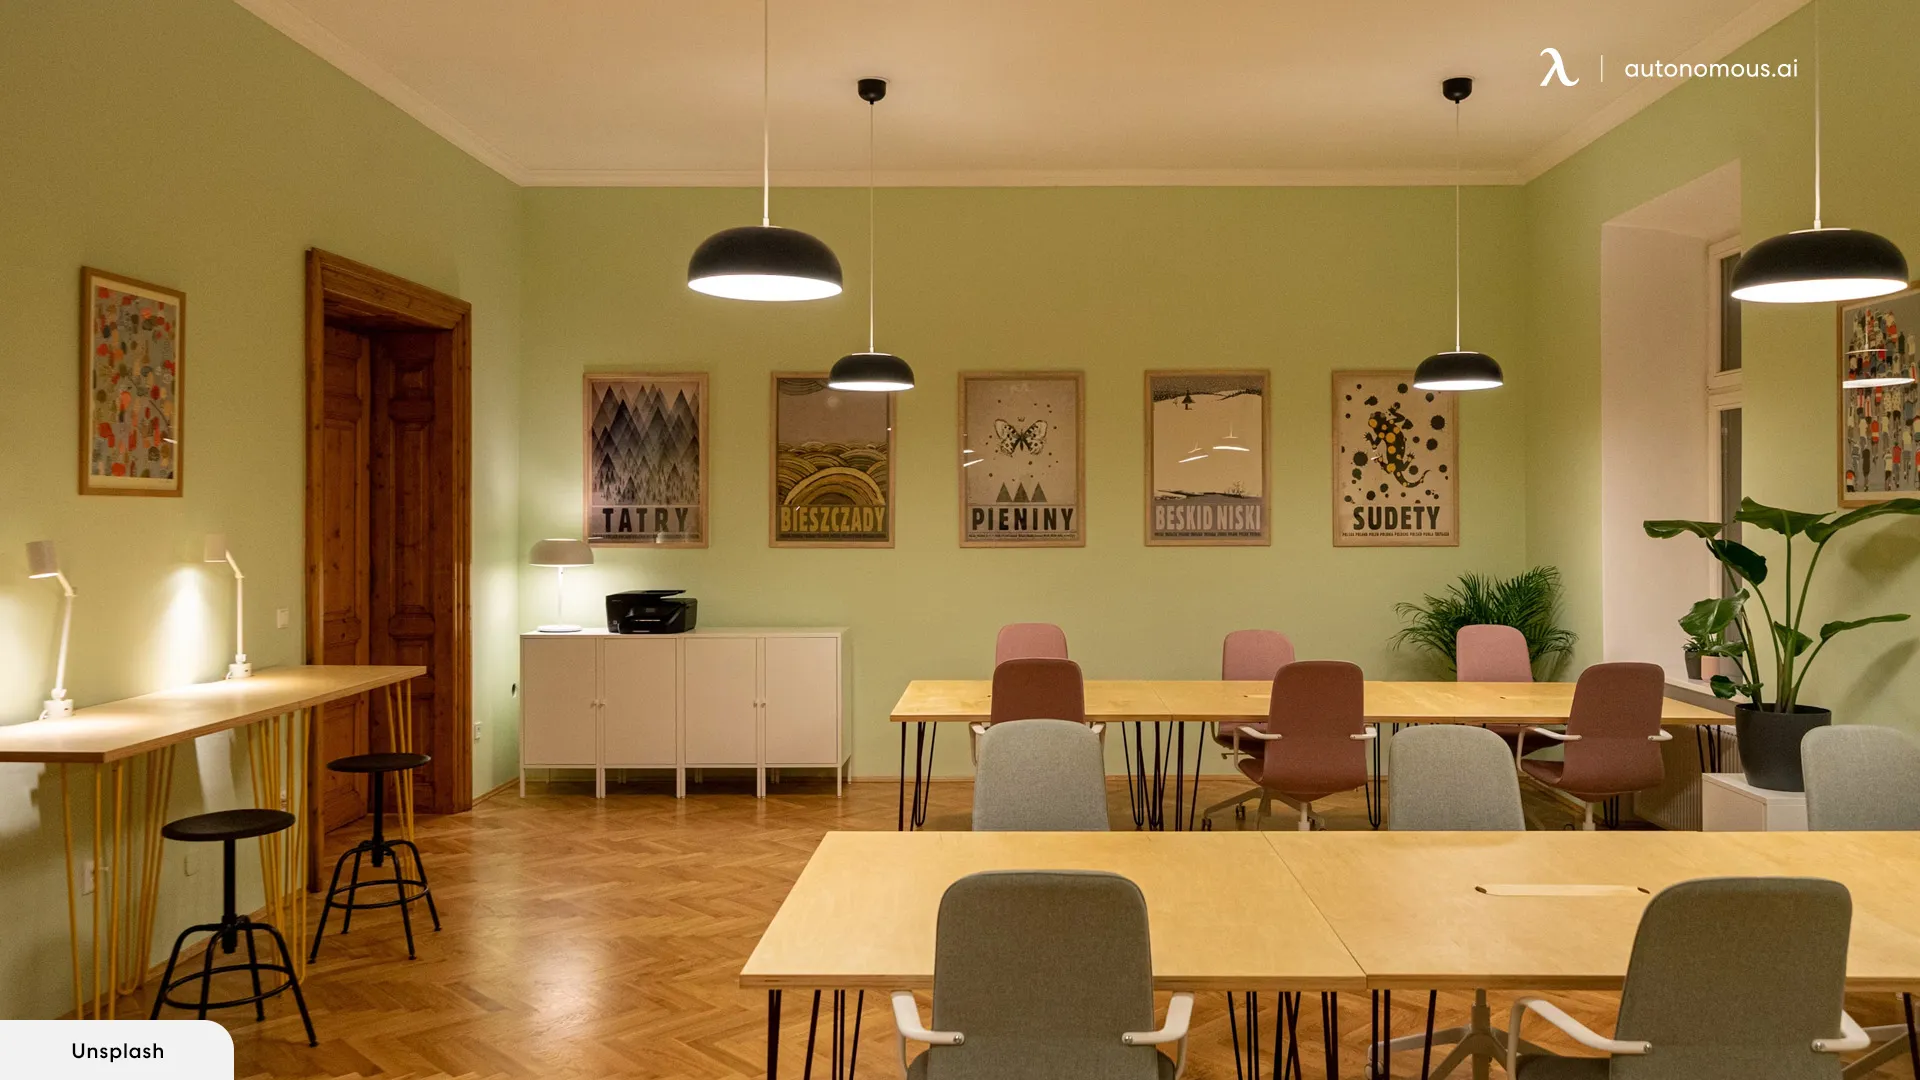 Can Temporary Office Space Become Long-term Office Space?